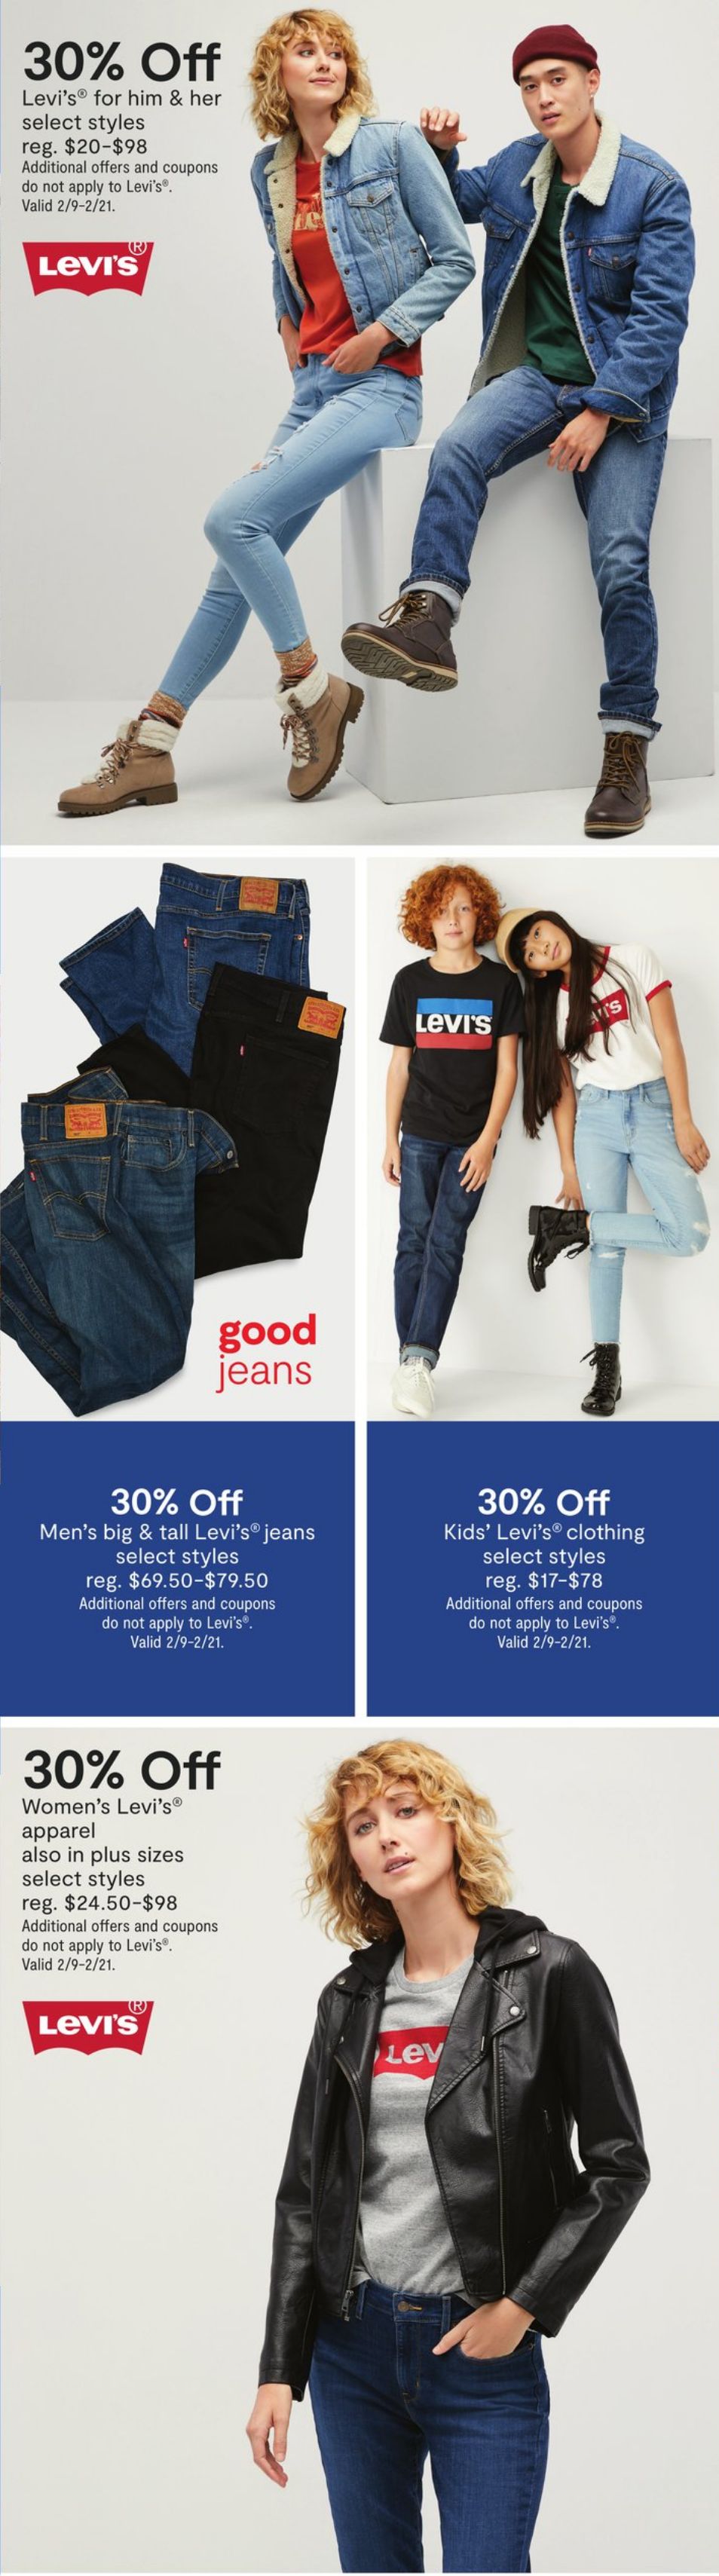 Weekly ad JC Penney 02/07/2022 - 02/14/2022